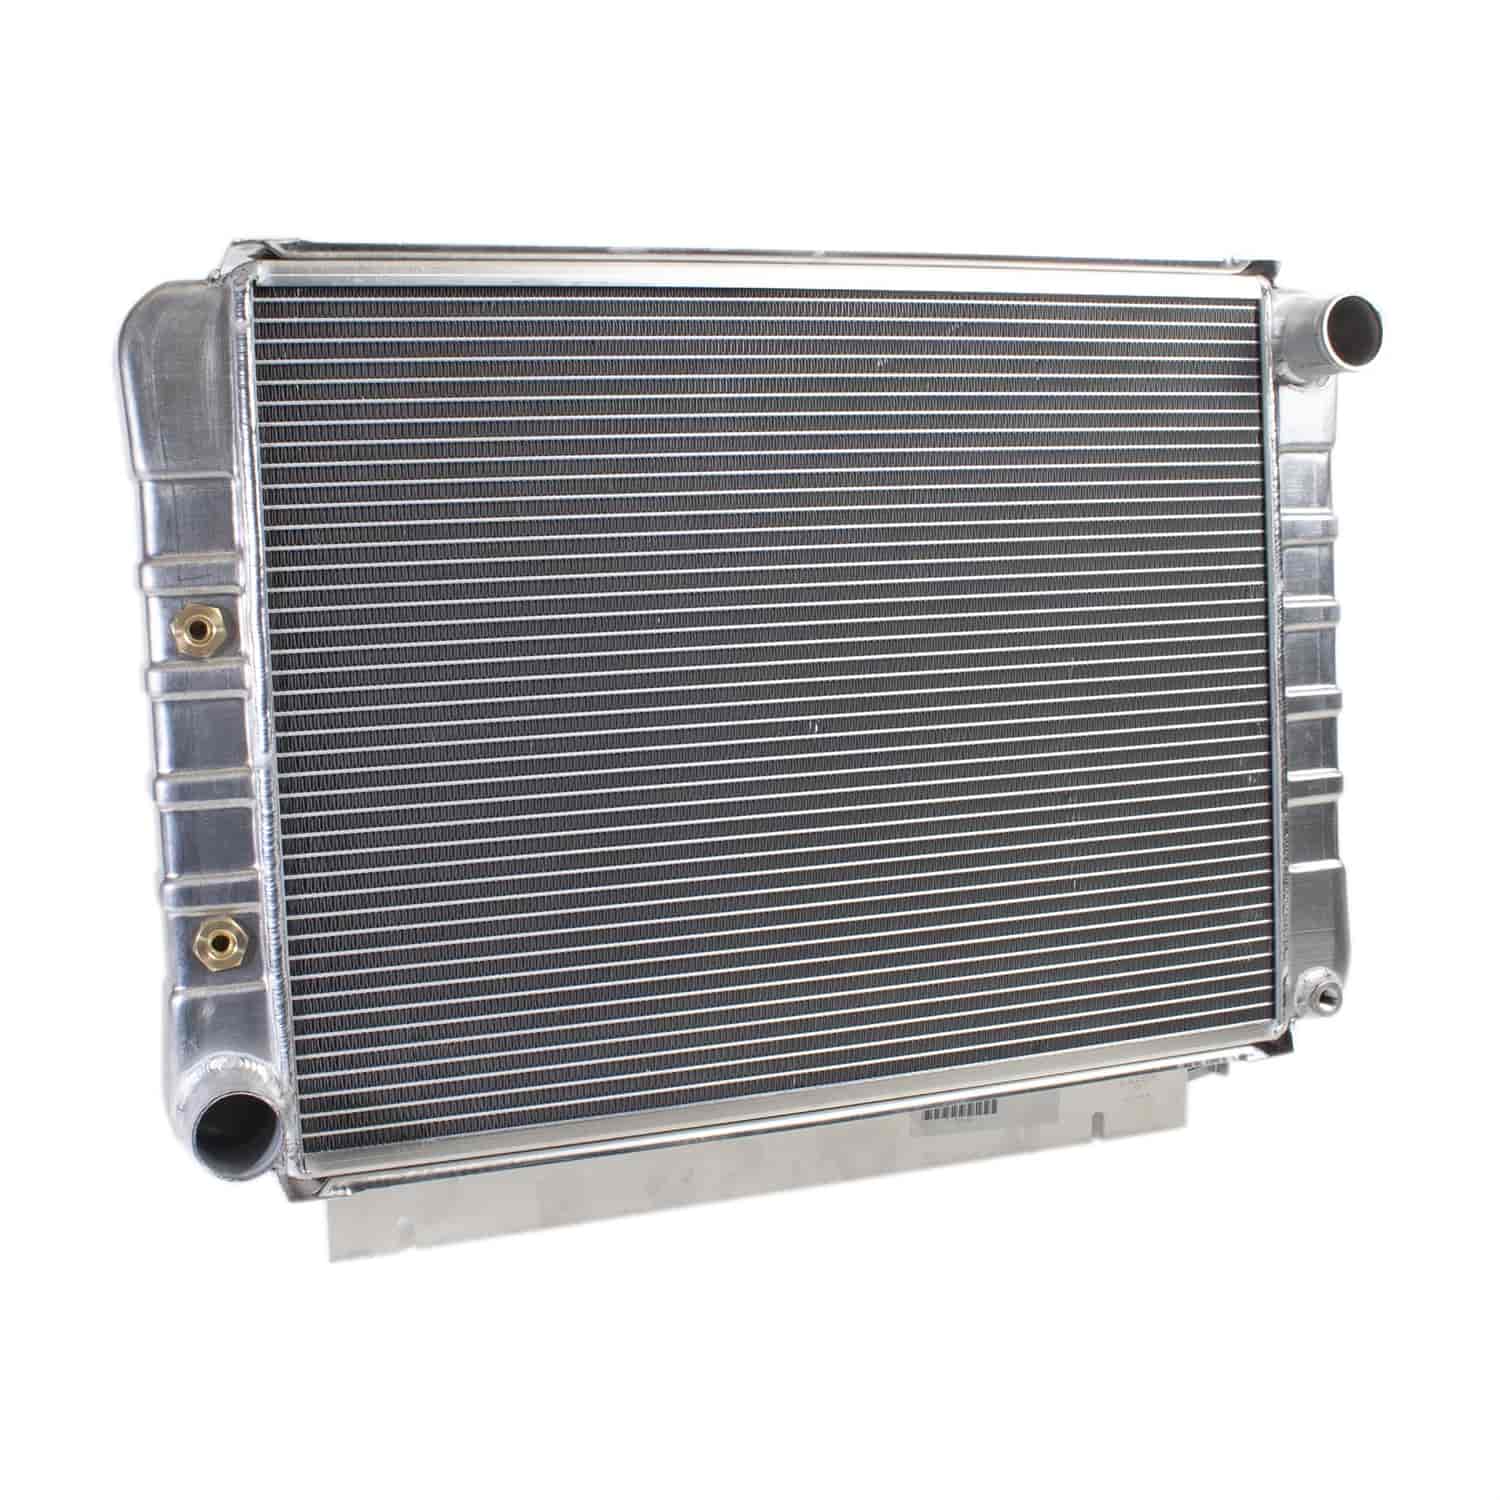 ExactFit Radiator for 1960-1963 Galaxie with Late Ford